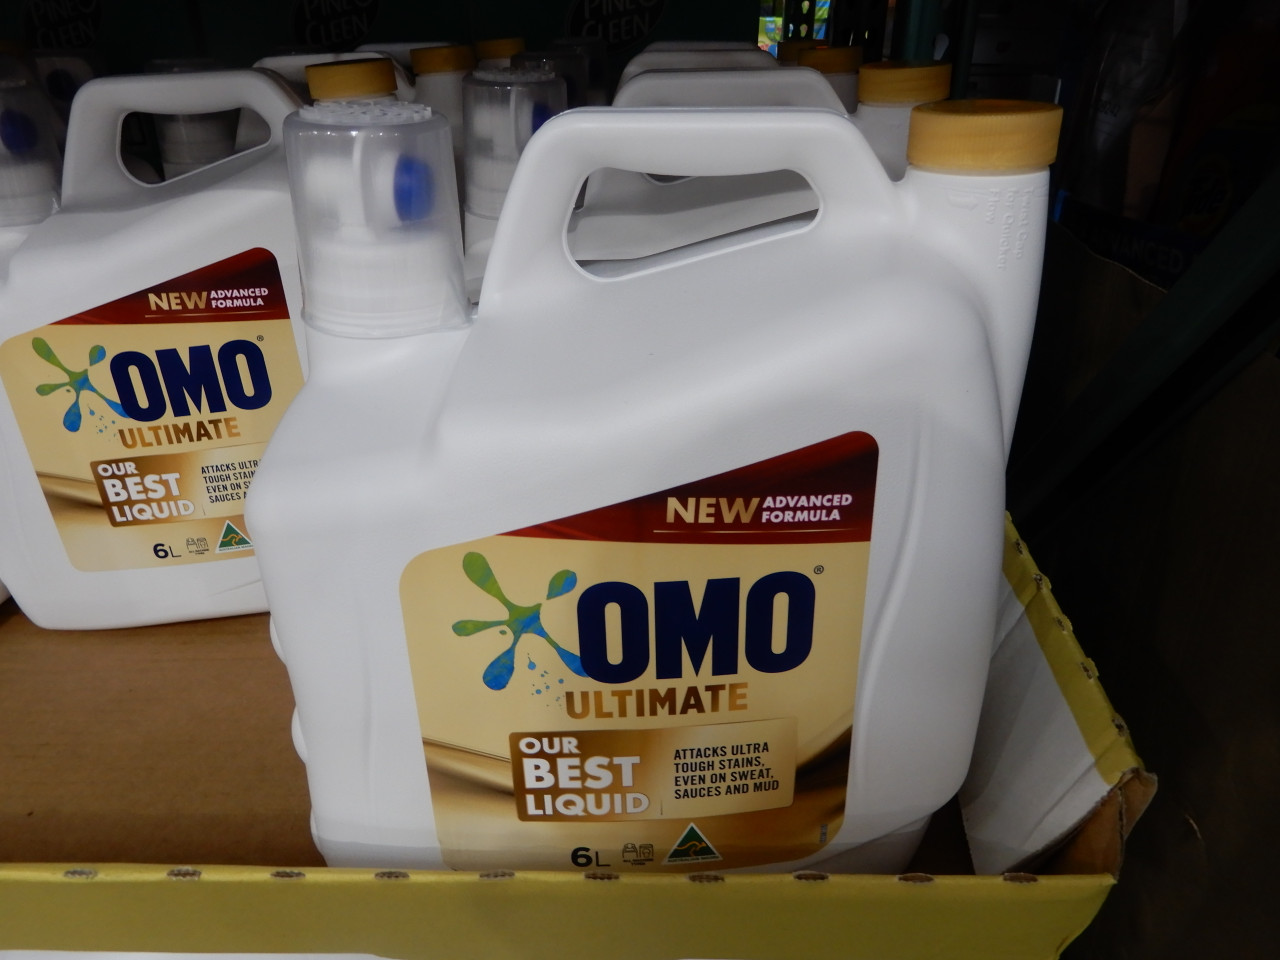 Buy OMO Ultimate Laundry Liquid Detergent 80 Washes 4L